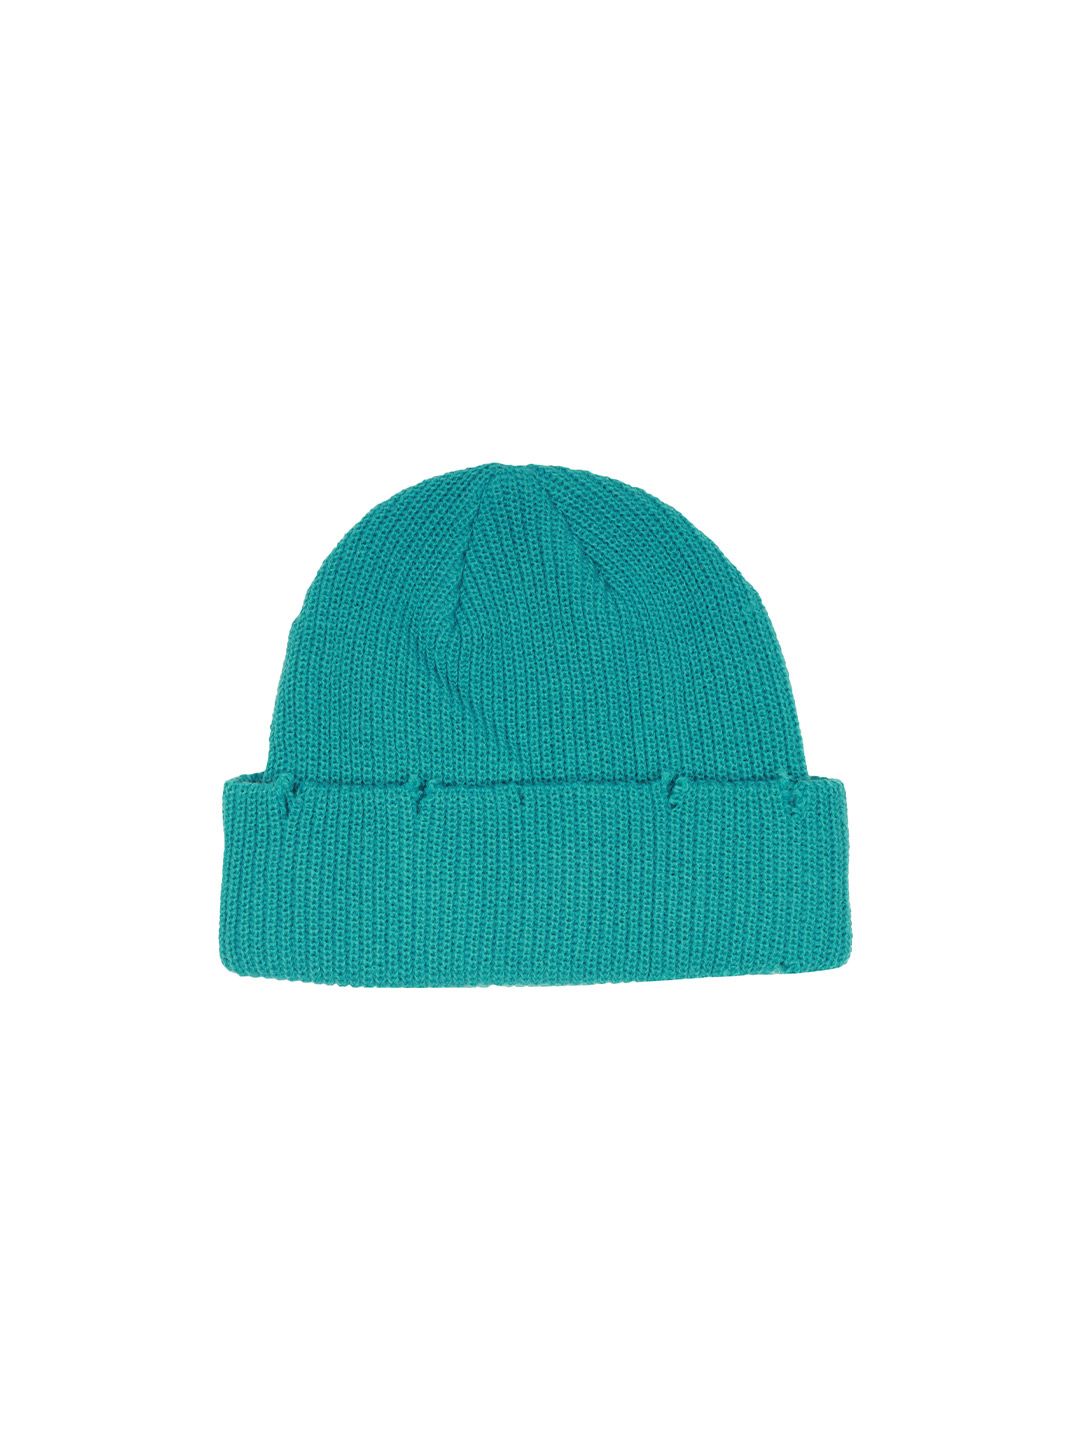 FabSeasons Adult Turquoise Blue Beanie Price in India